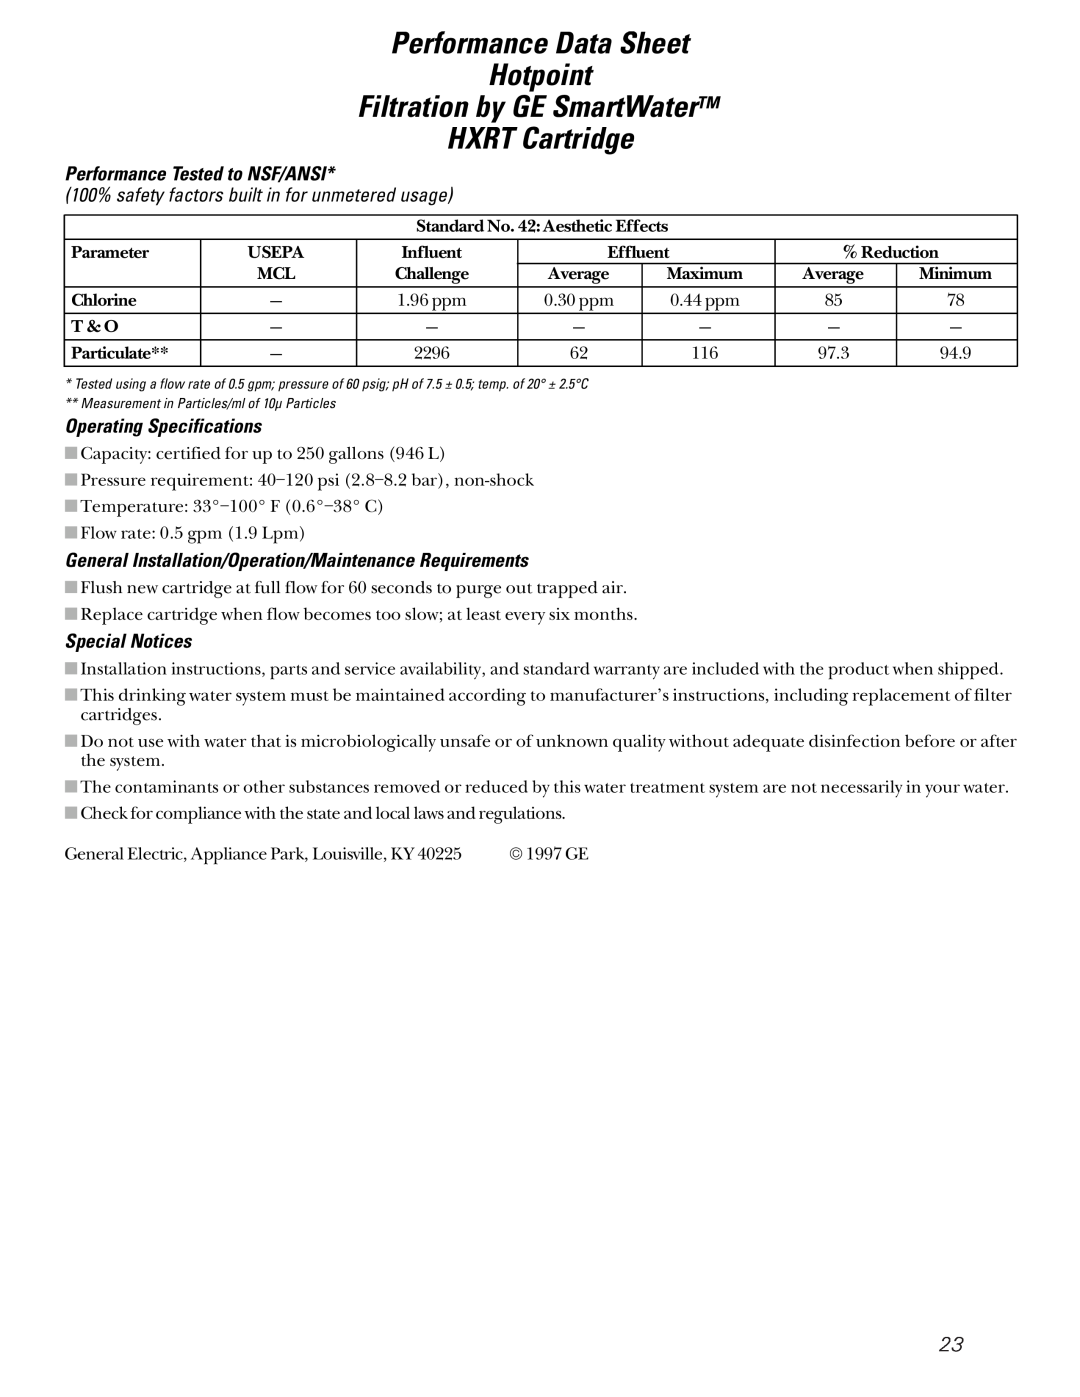 GE 162D6733P007 Performance Data Sheet Hotpoint Filtration by GE SmartWaterTM, HXRT Cartridge, Operating Specifications 